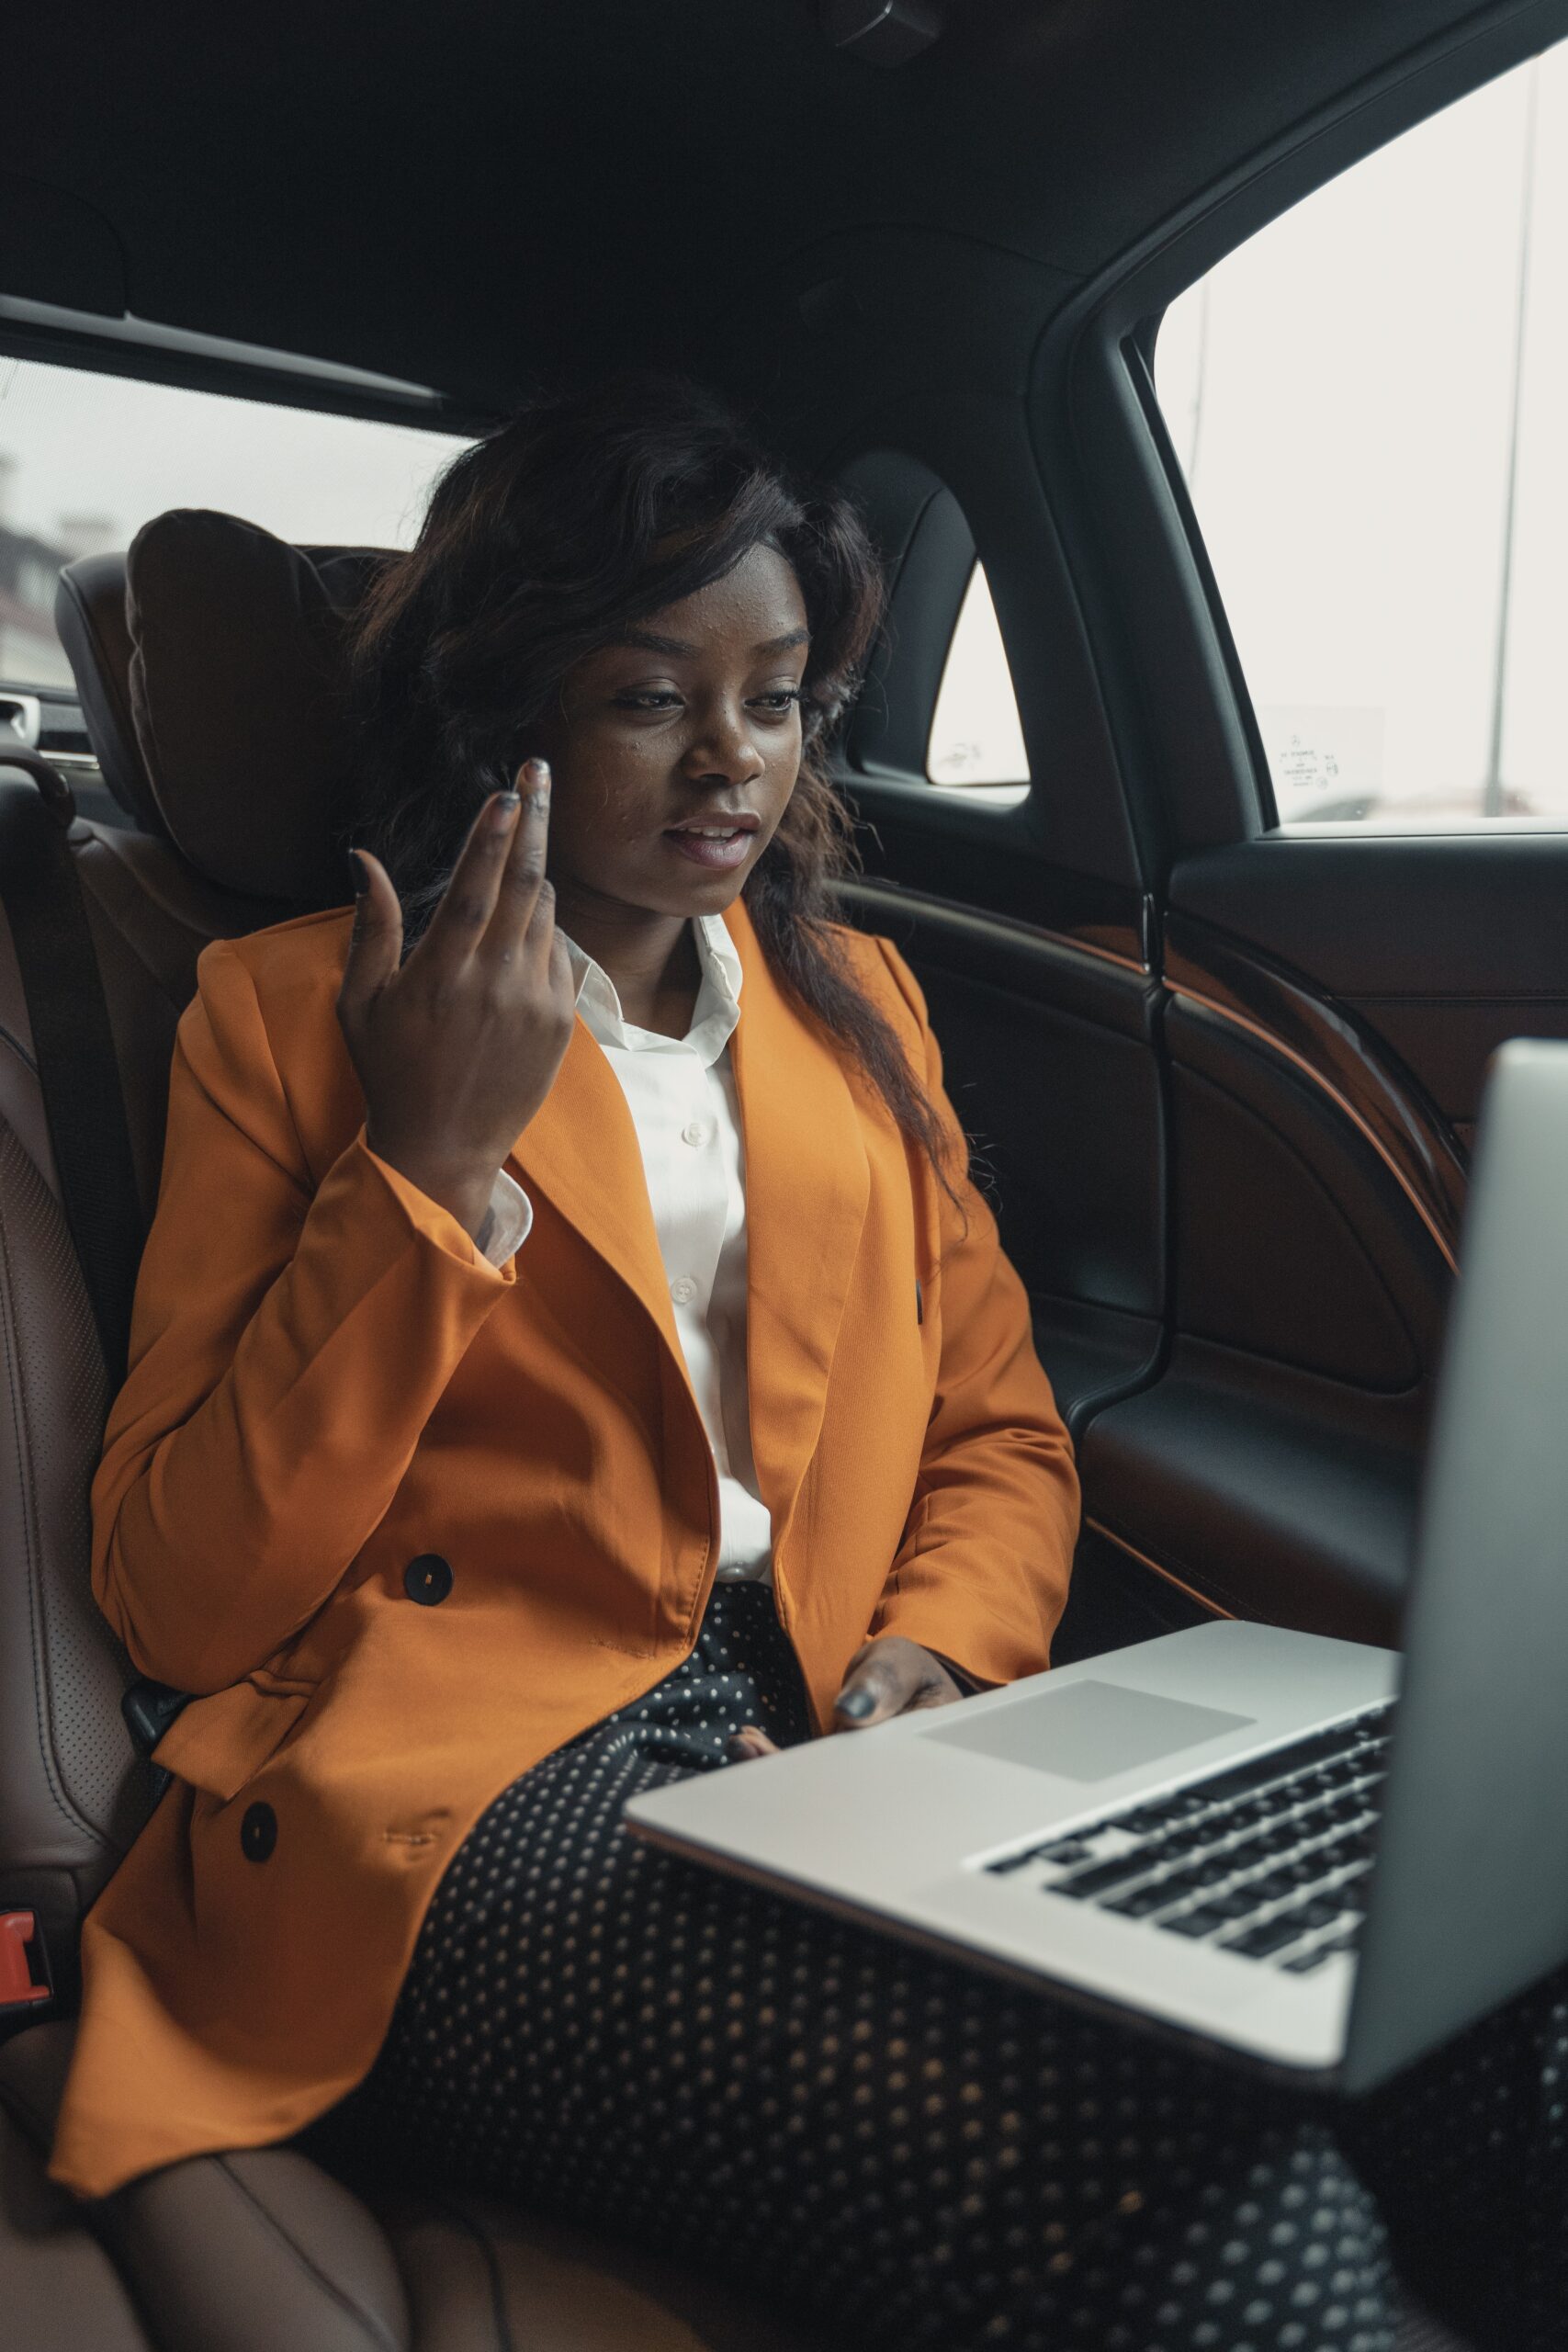 woman in a suit jacket sitting in the back of a car while on a conference call on laptop